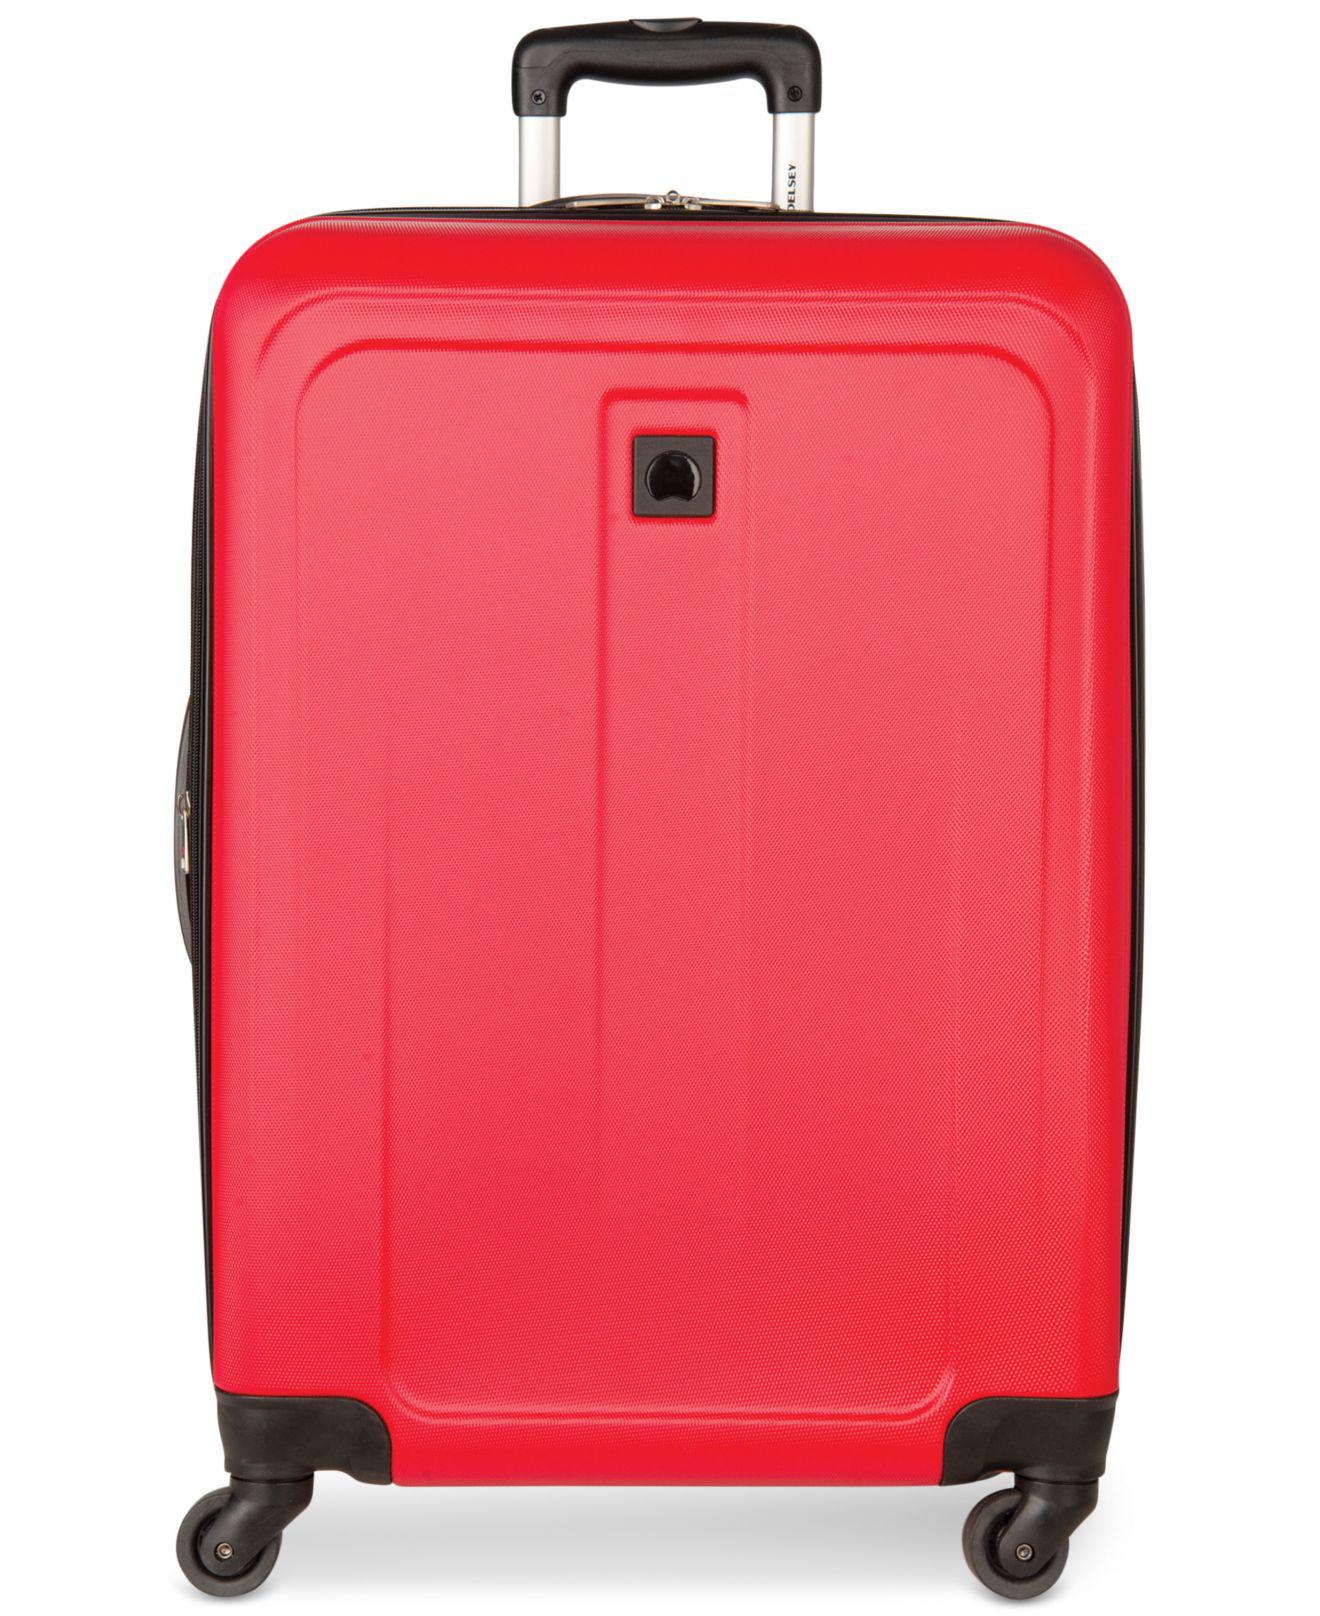 Delsey Free Style 2.0 25" Hardside Expandable Spinner Suitcase in Red | Lyst